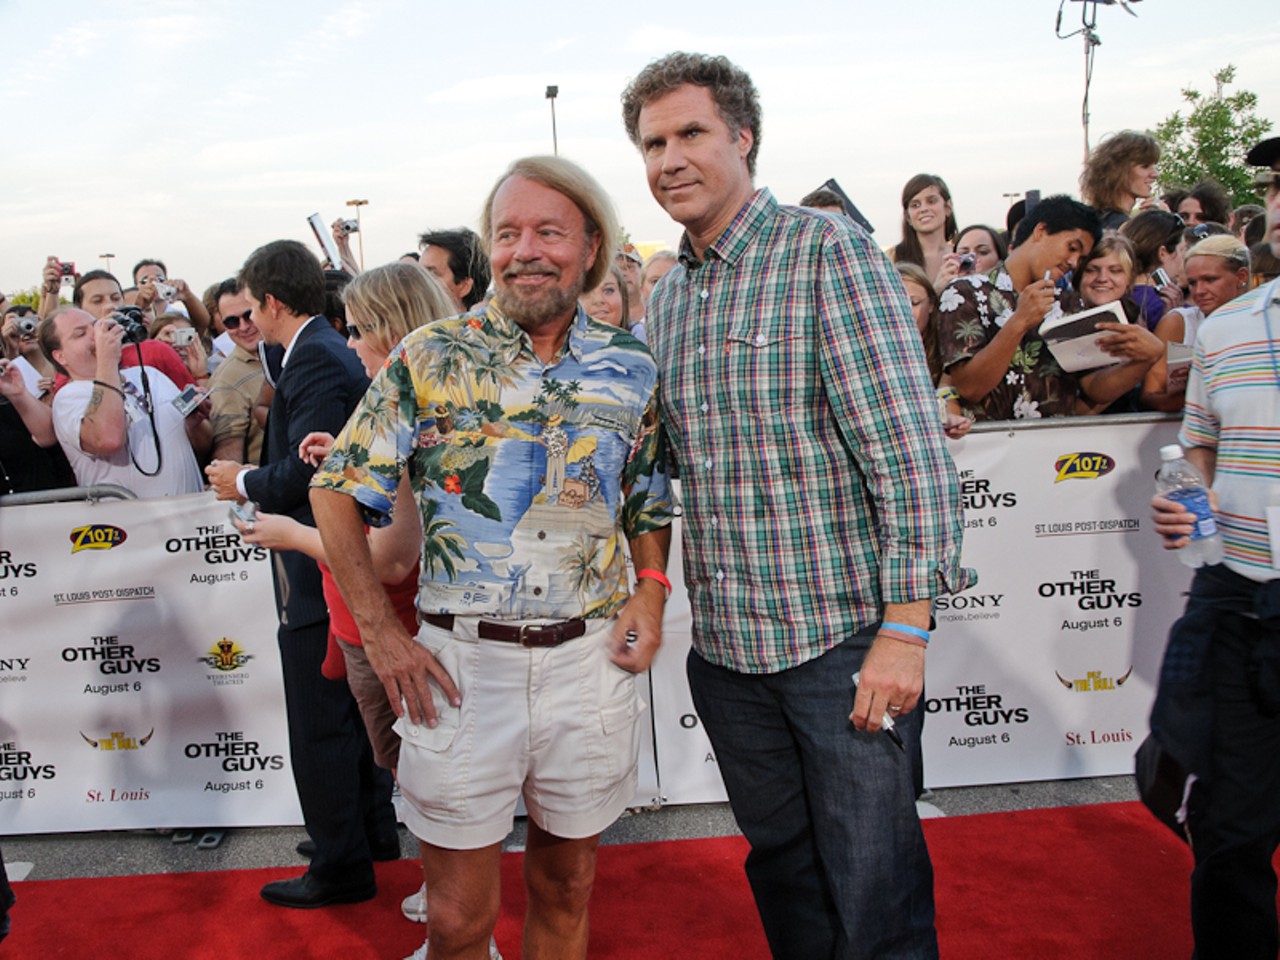 Joe Edwards and Will Ferrell pose for photos on the red carpet.